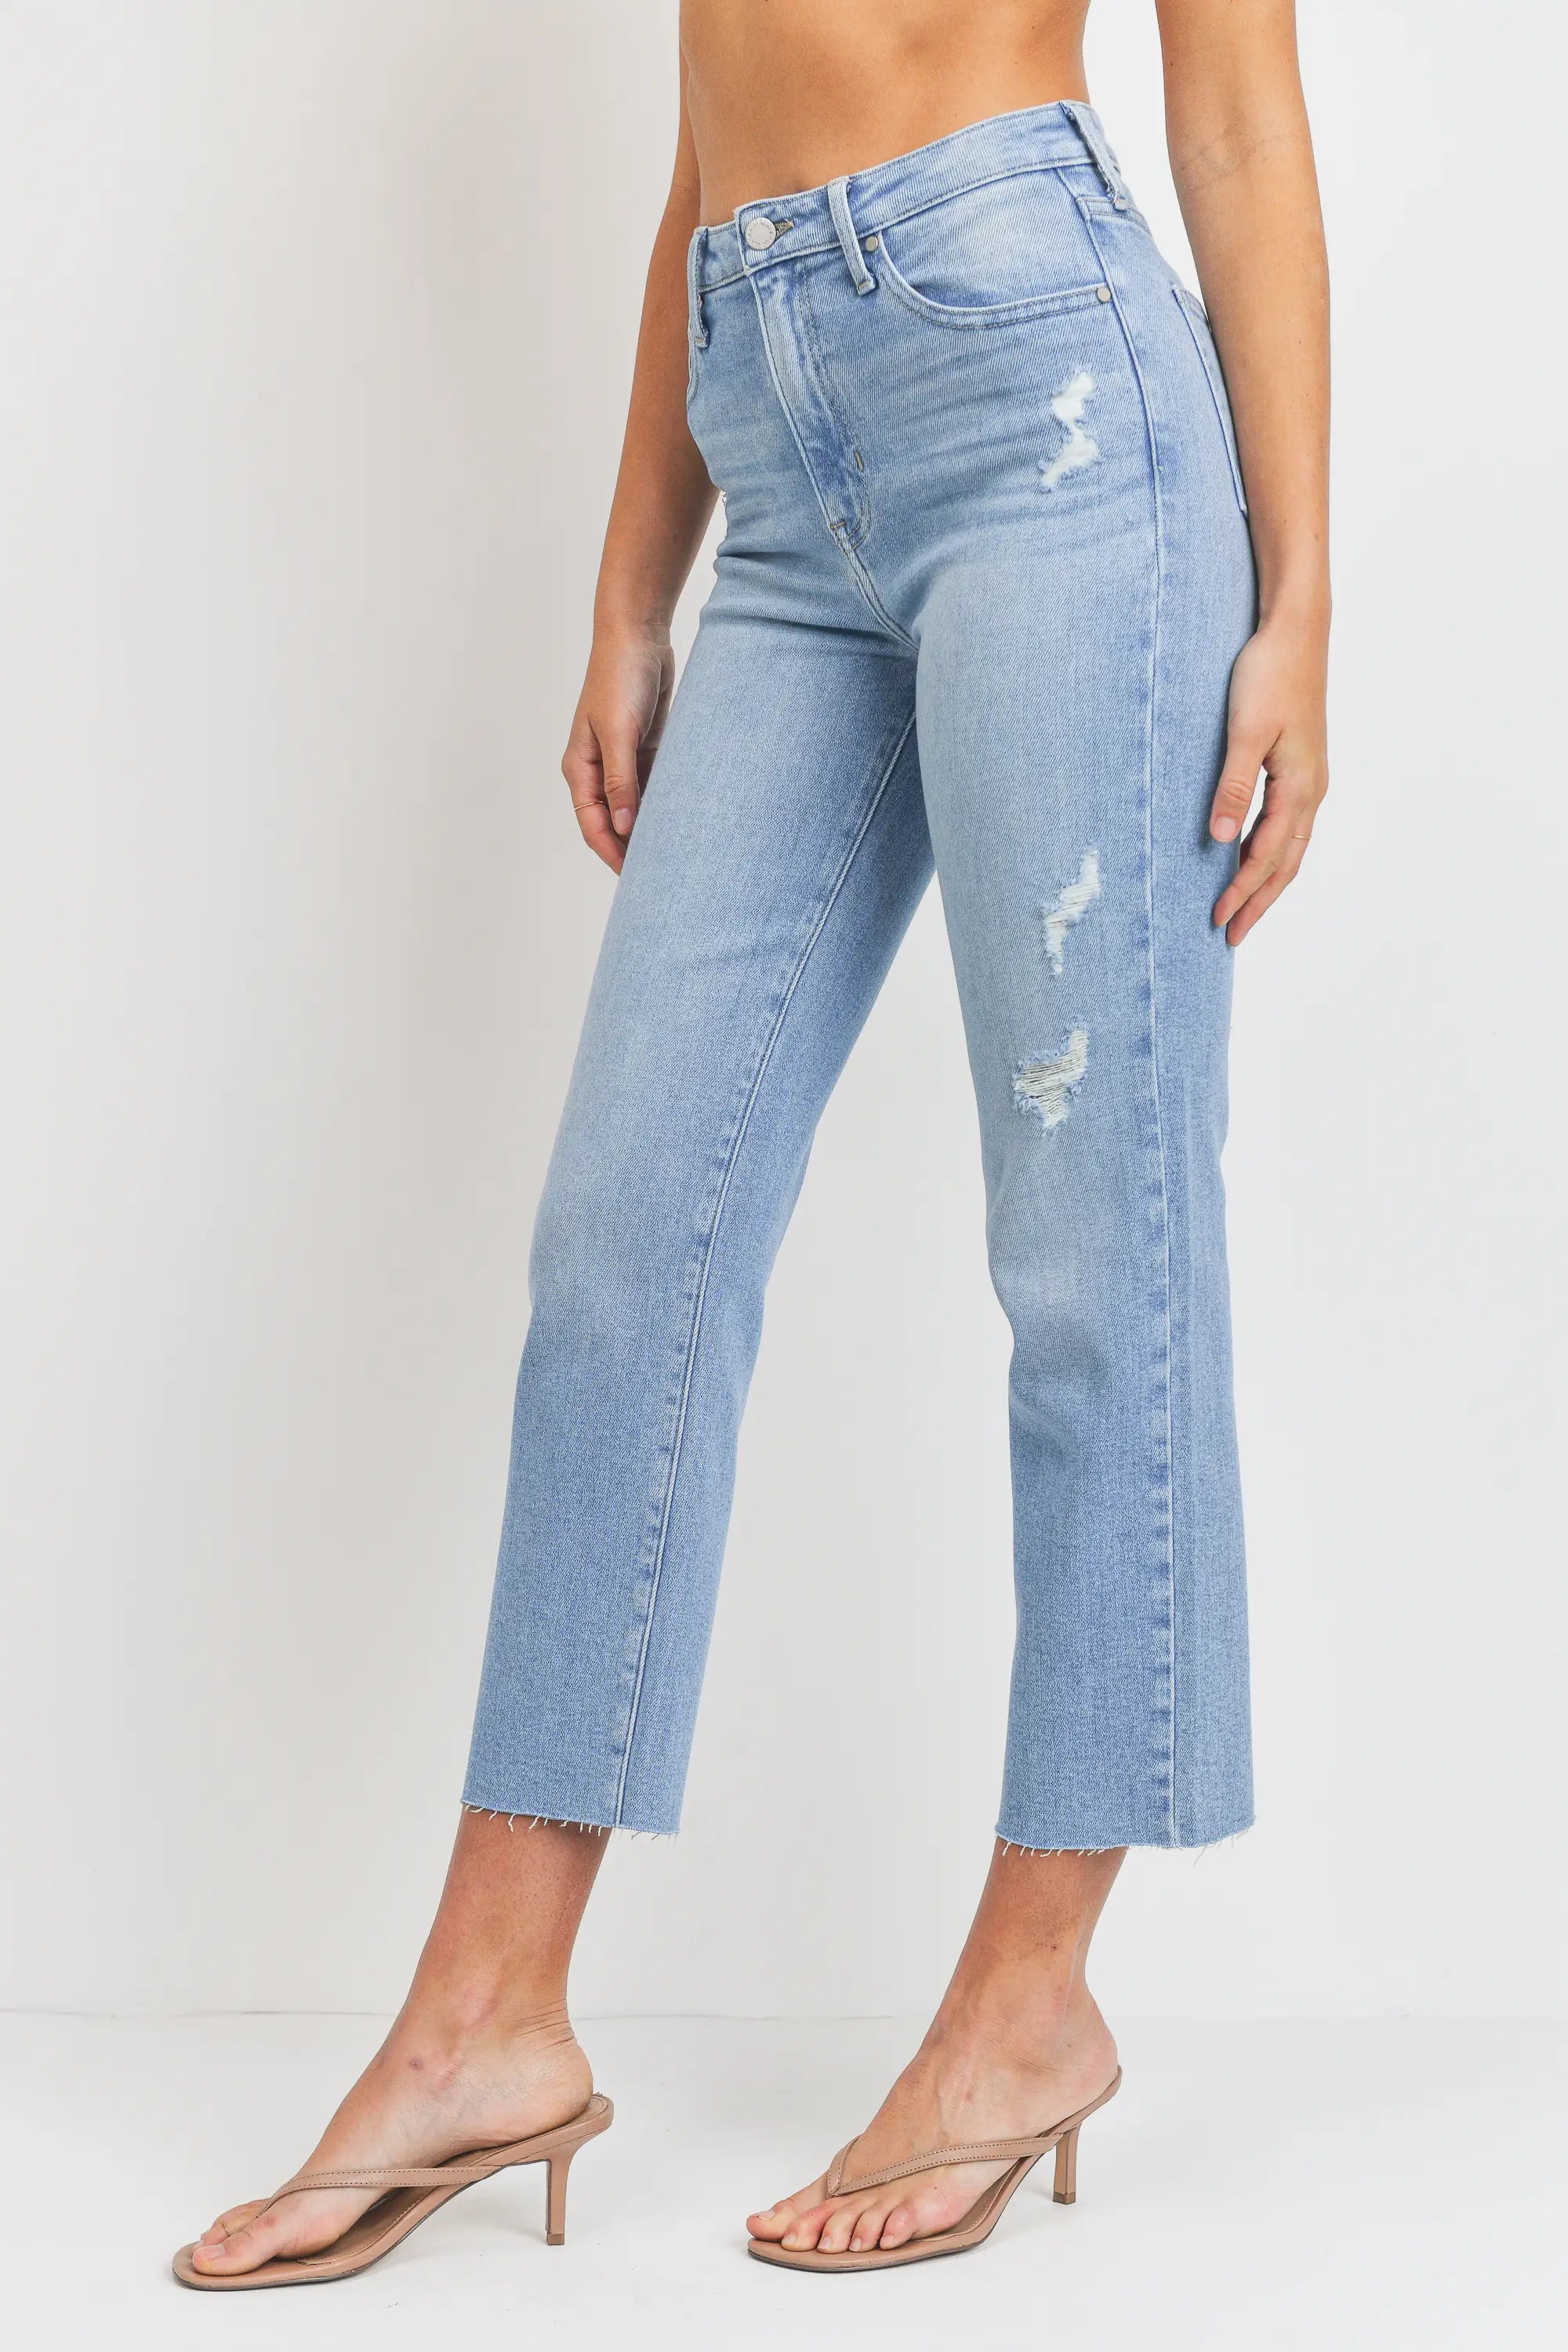 The Donnie Minimal Distressed Straight Jeans by Just Black Denim